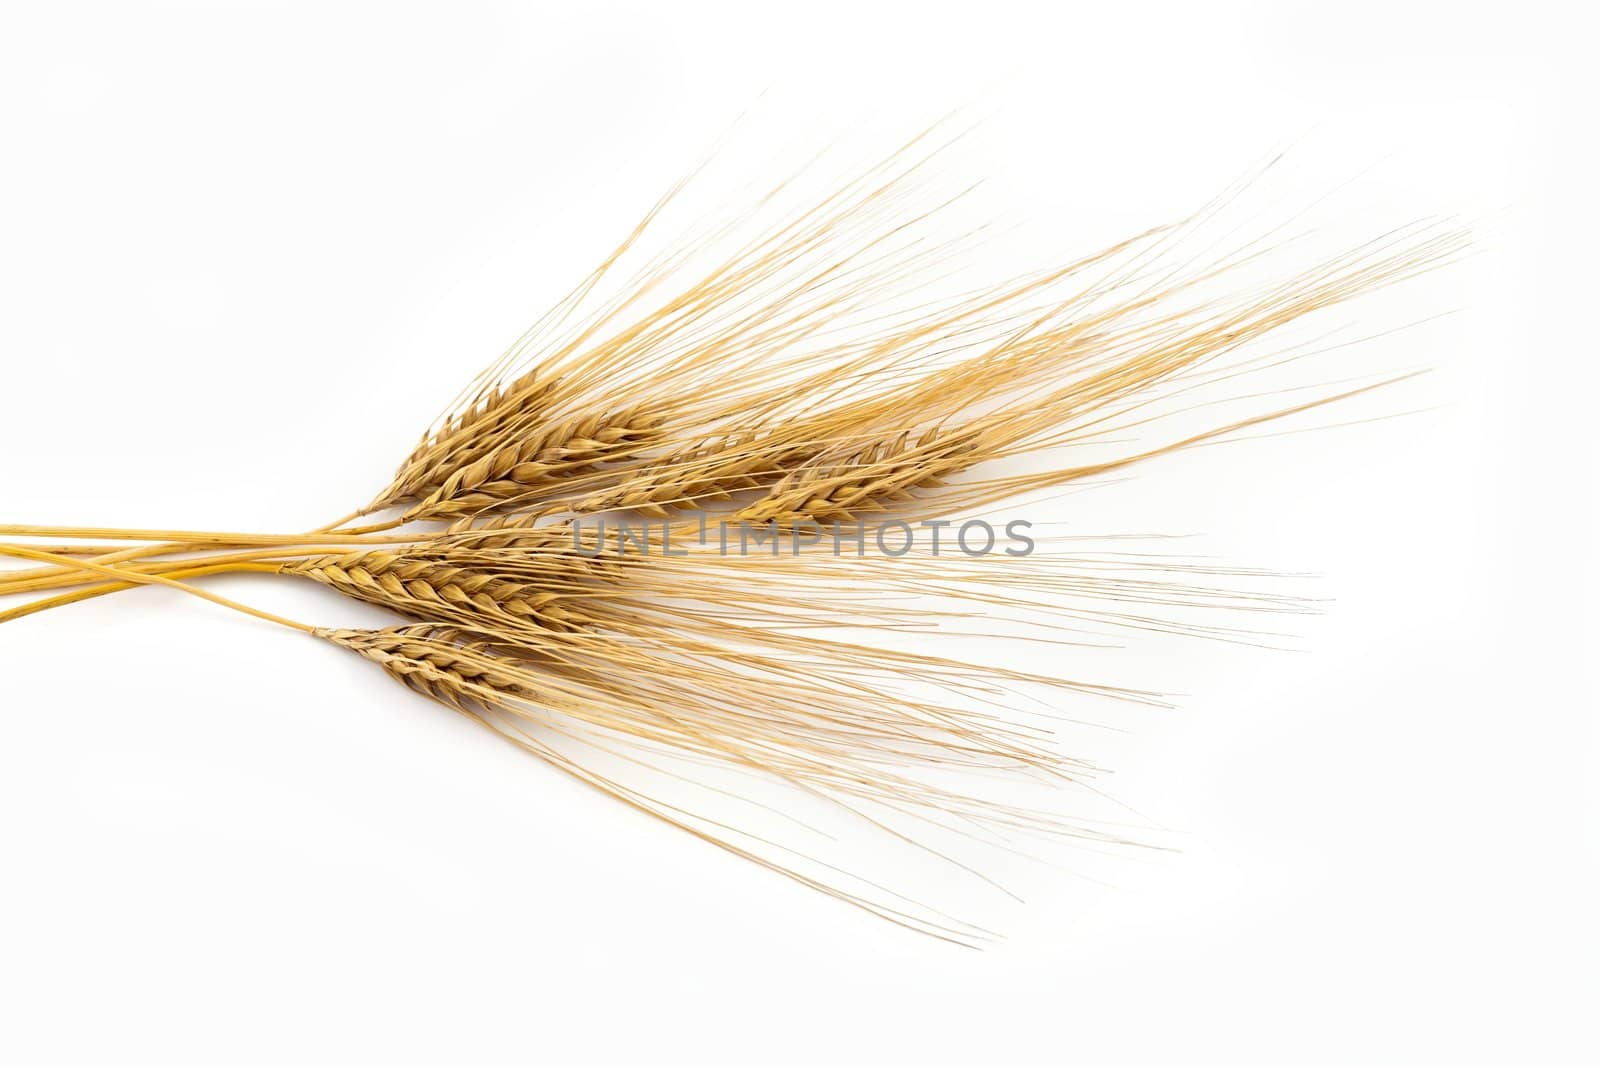 An image of a bunch of yellow ears of barley